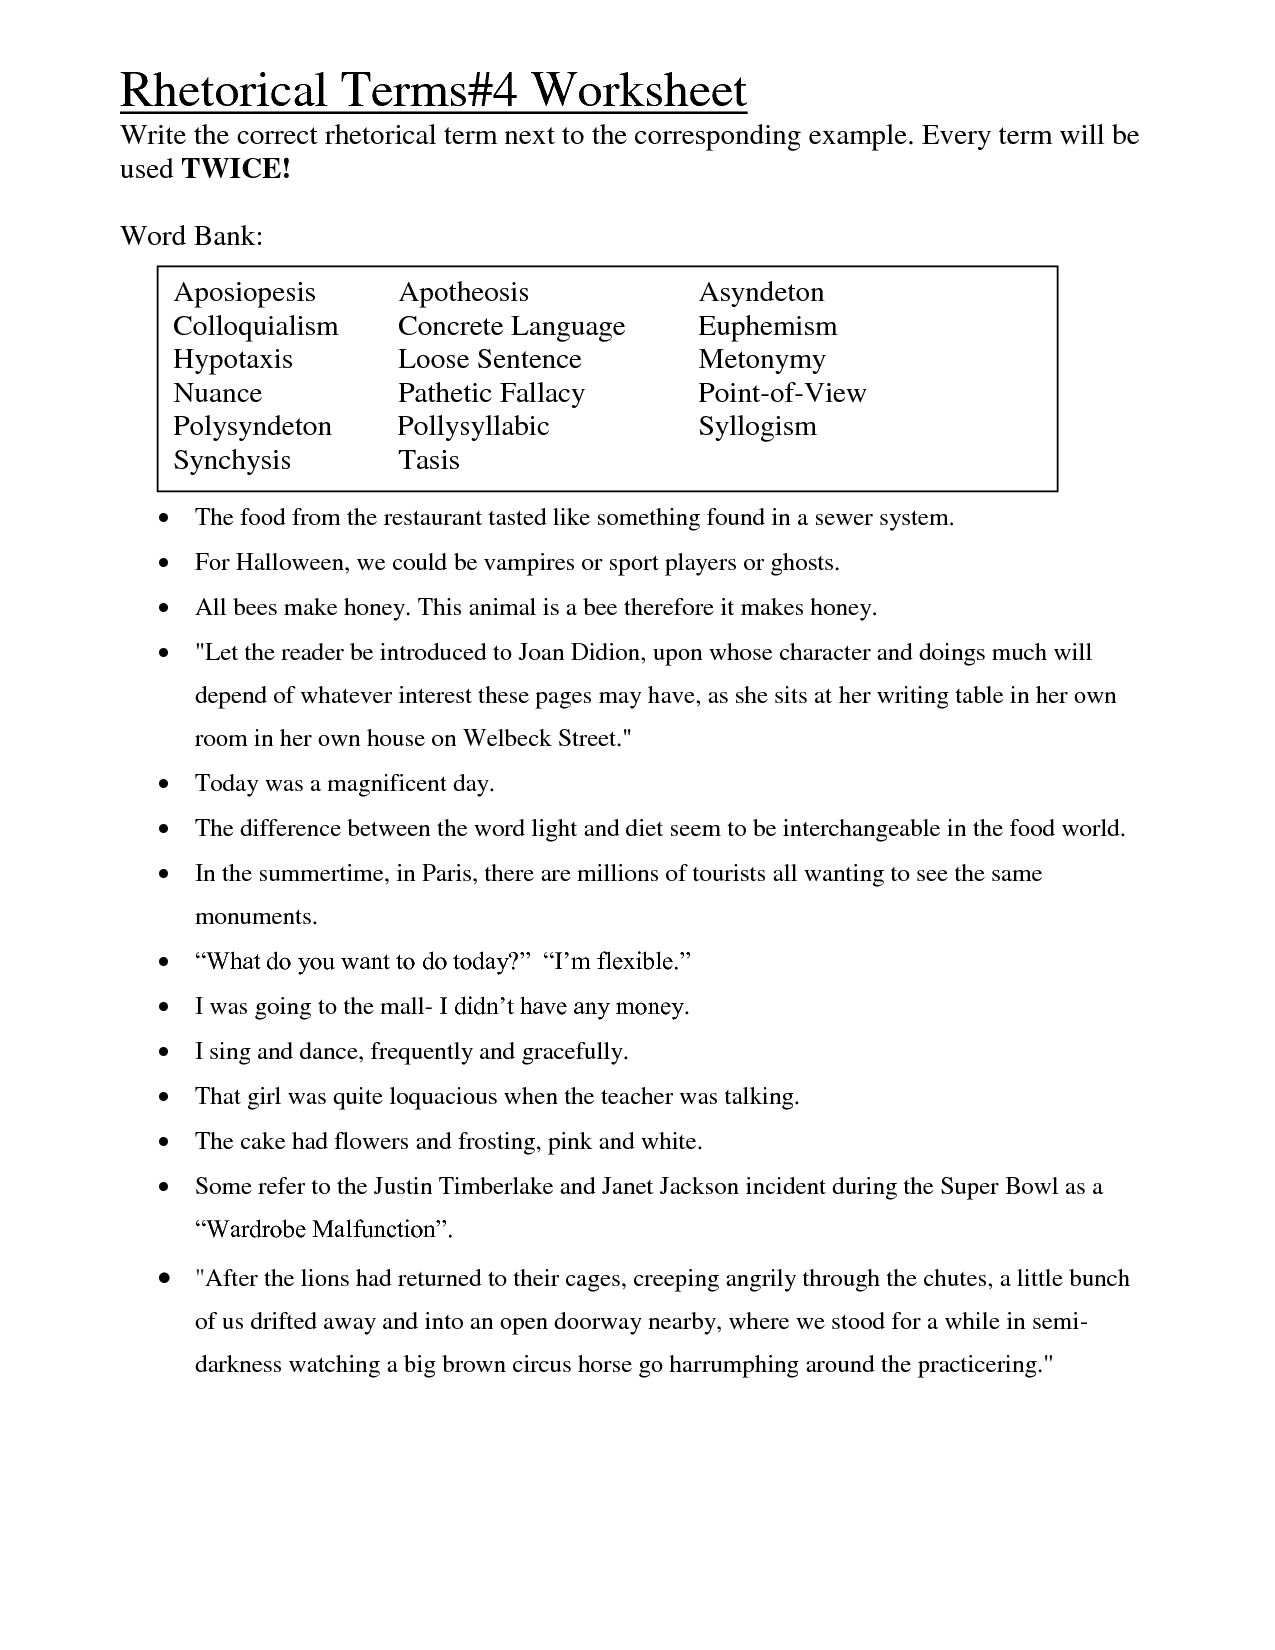 Common Logical Fallacies Worksheet Answers